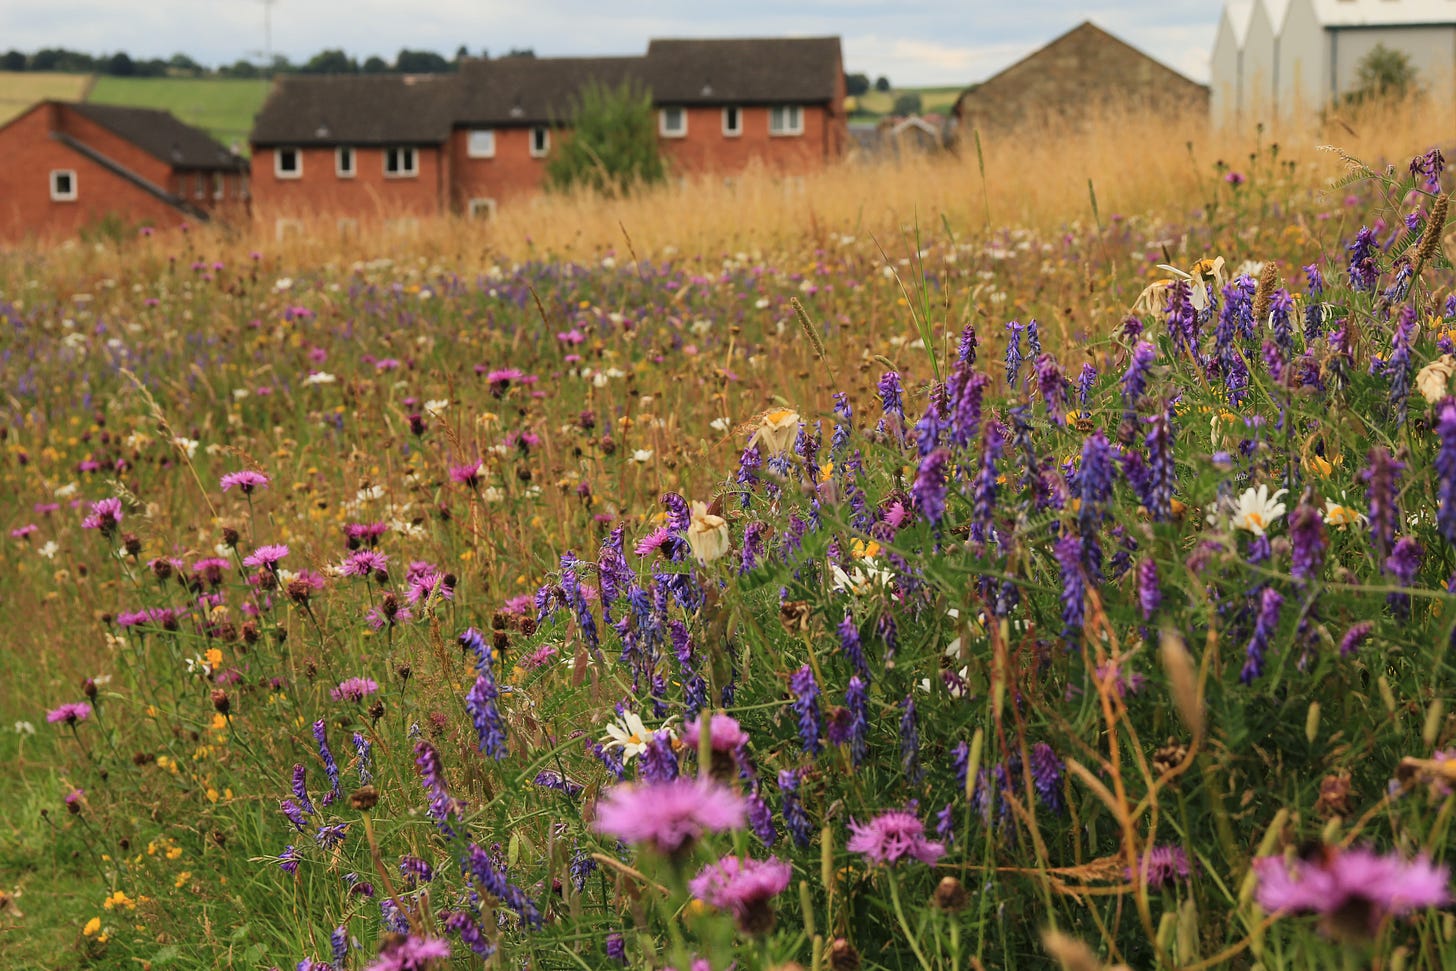 a wildflower meadow on the edge of a housing estate